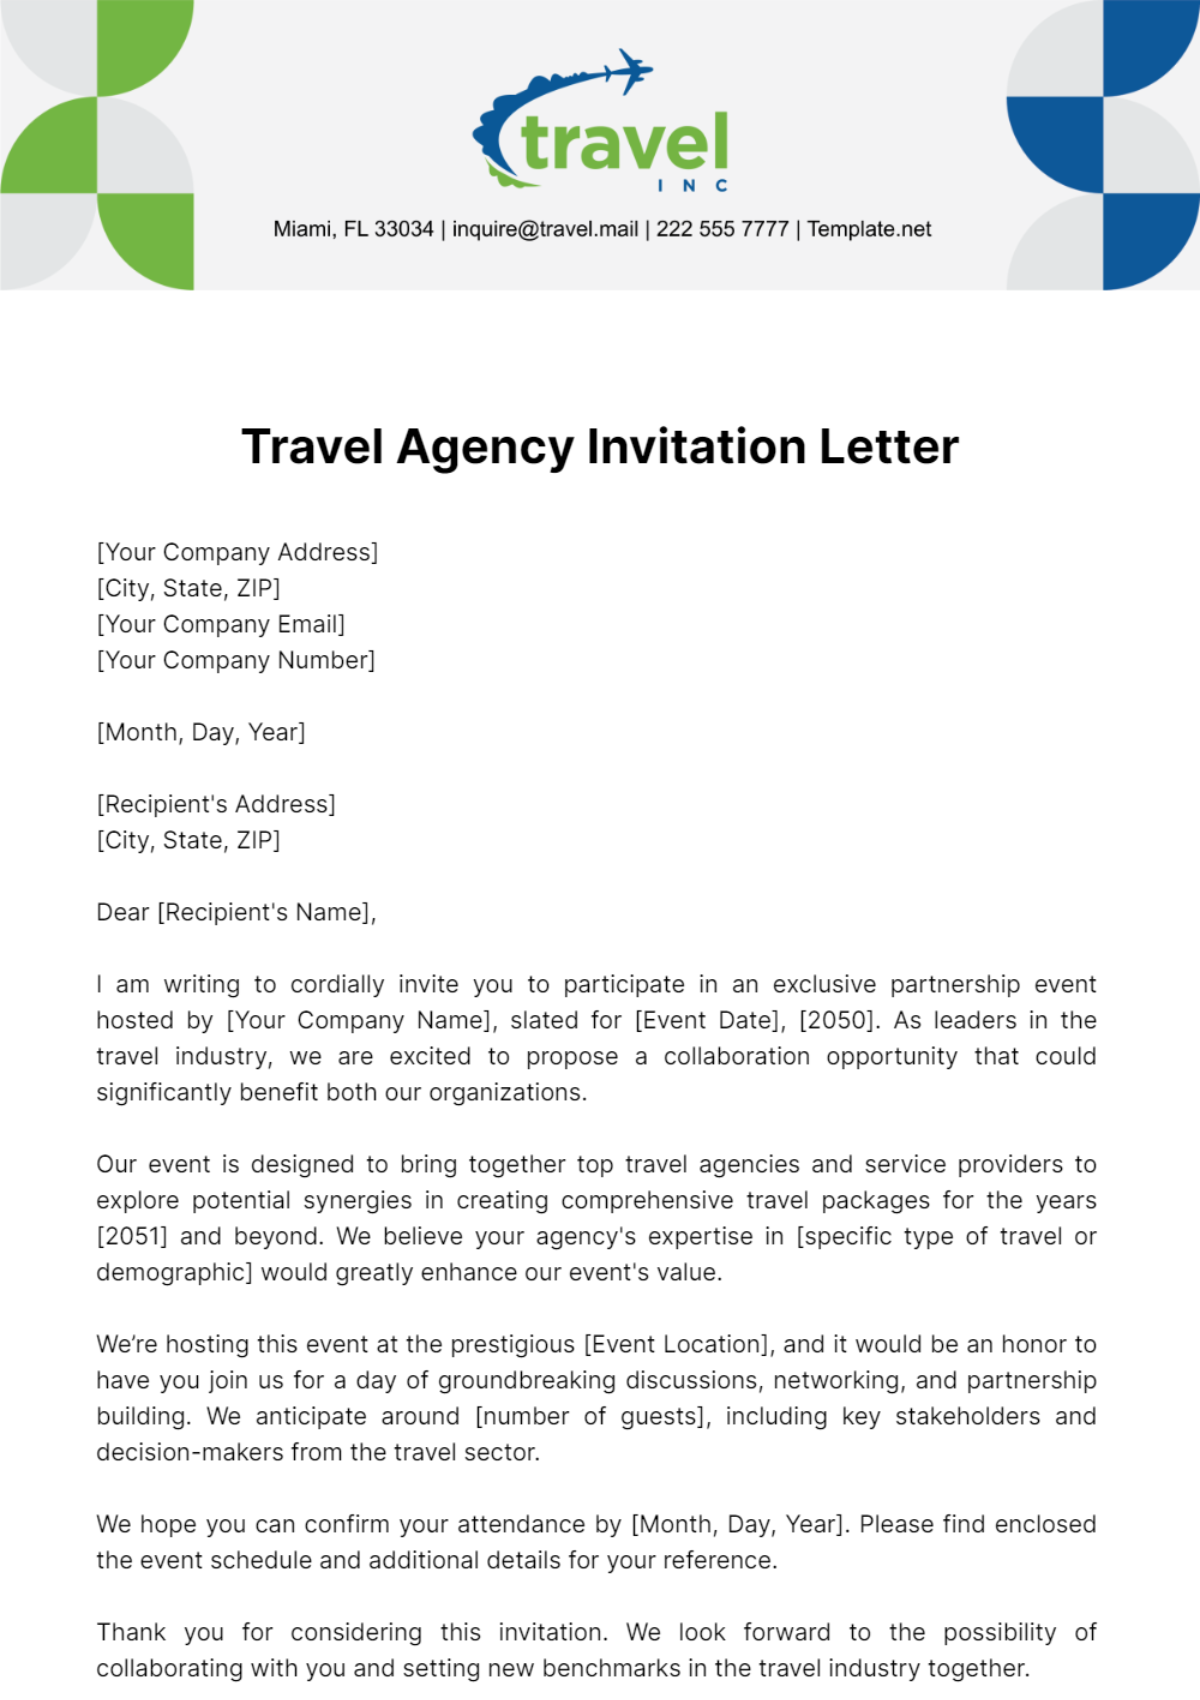 Free Travel Agency Invitation Letter Template